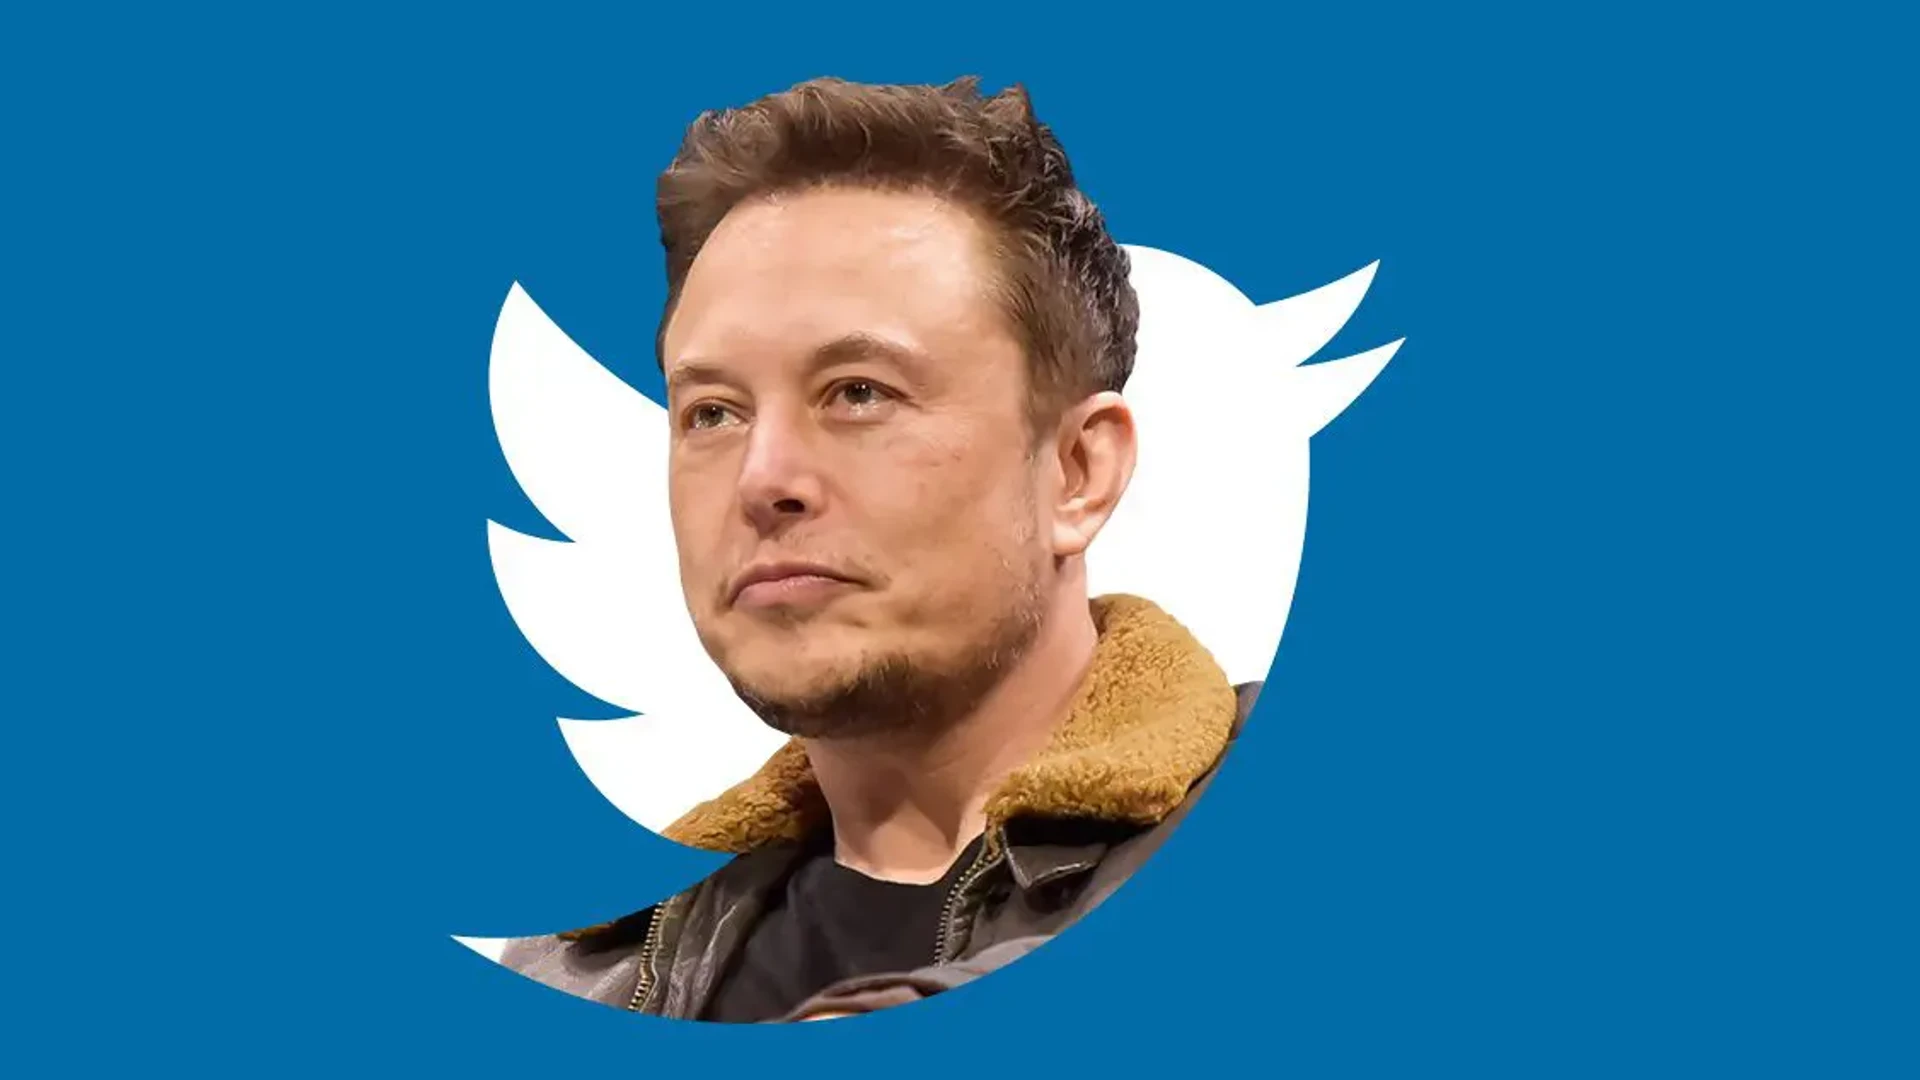 Elon Musk launches an aggressive takeover of Twitter for $43 billion.